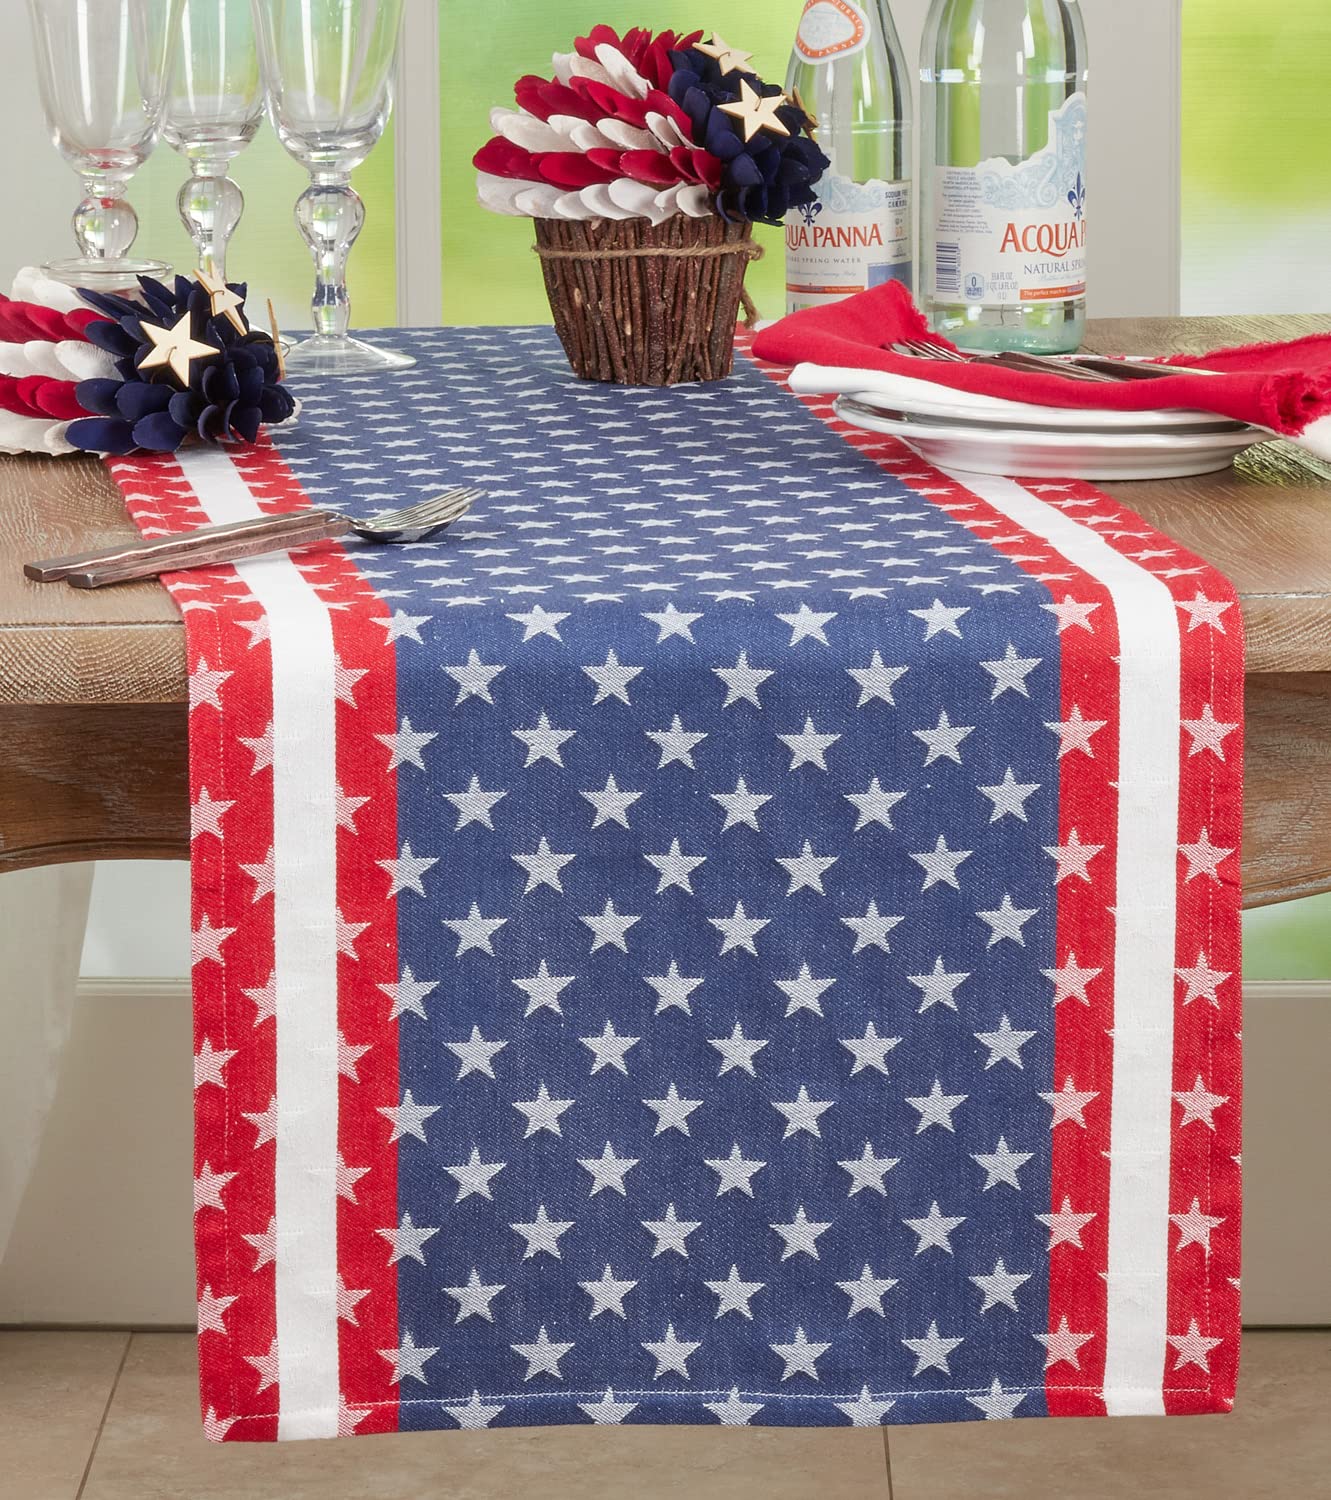 Fennco Styles Stripe Star Americana Cotton Table Runner 16" W x 72" L - Multicolored American Flag Inspired Table Cover for Home Décor, Dinner Parties, National Holidays